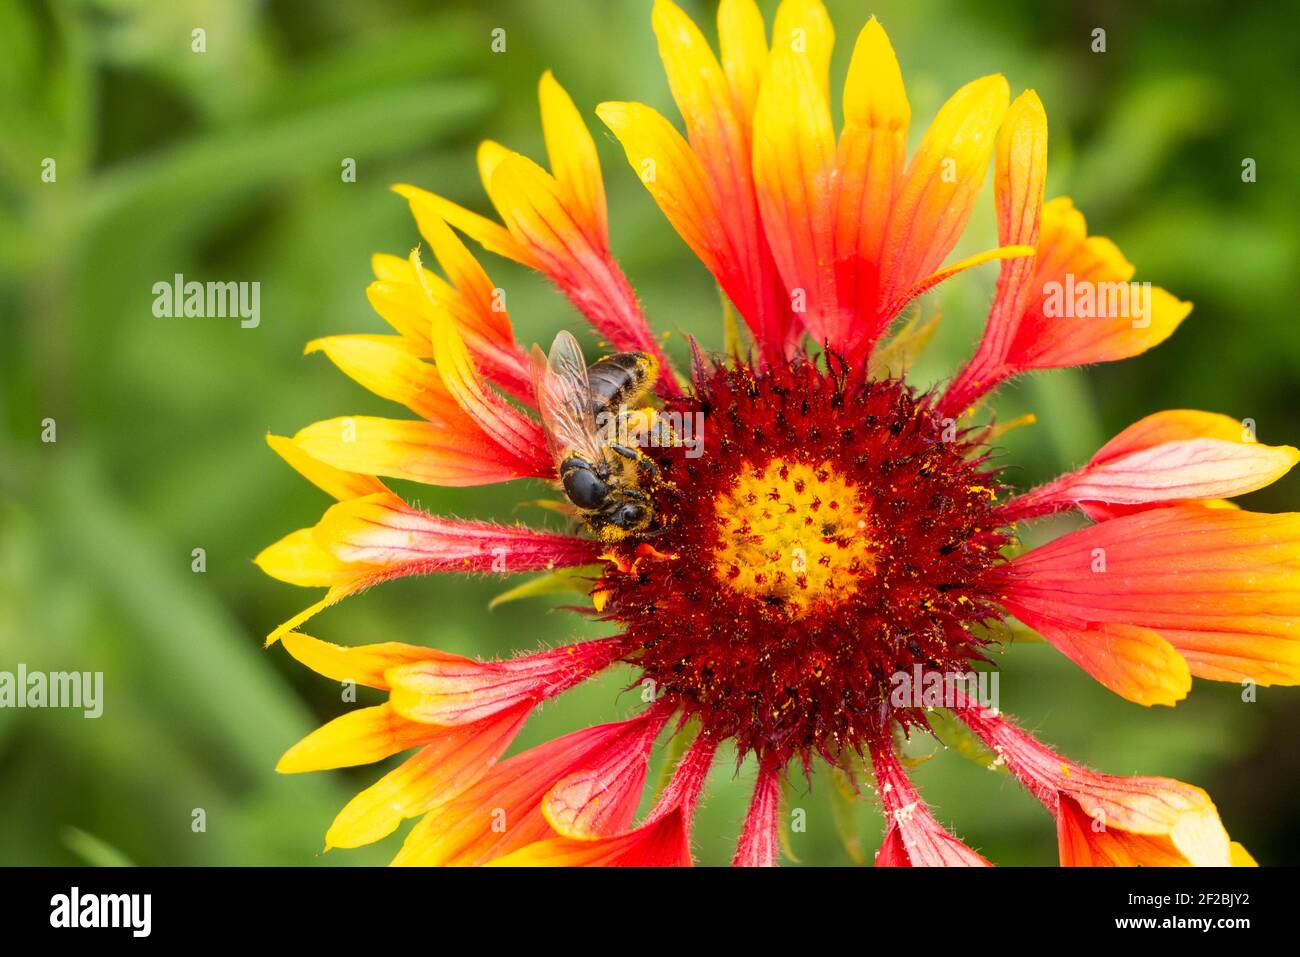 A bee feeds on nectar on an unusual flower. The petals look like a gramophone. The insect has pollen on its legs. Blurred Stock Photo